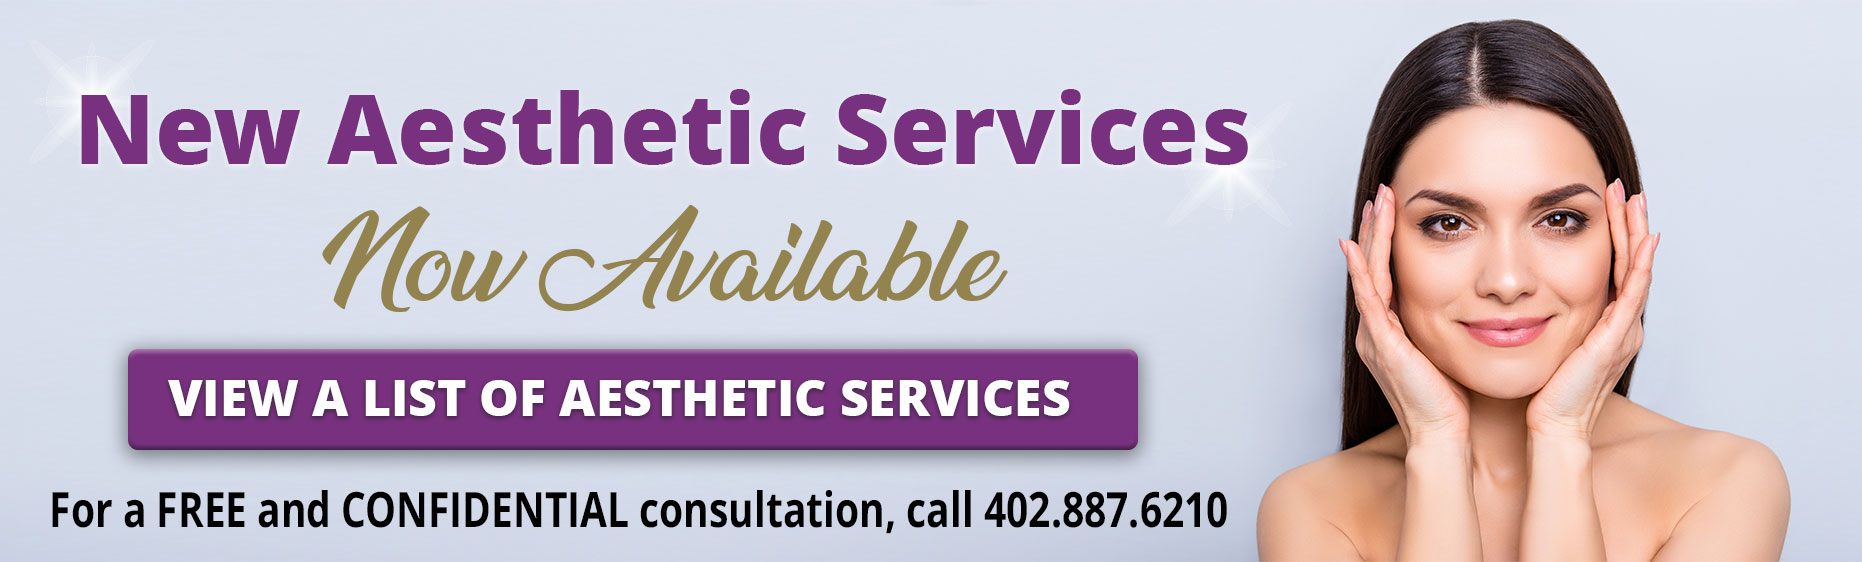 New Aesthetic Services Now Available

Click here for a list of aesthetic services

“For a FREE and CONFIDENTIAL consultation, call 402.887.6210”